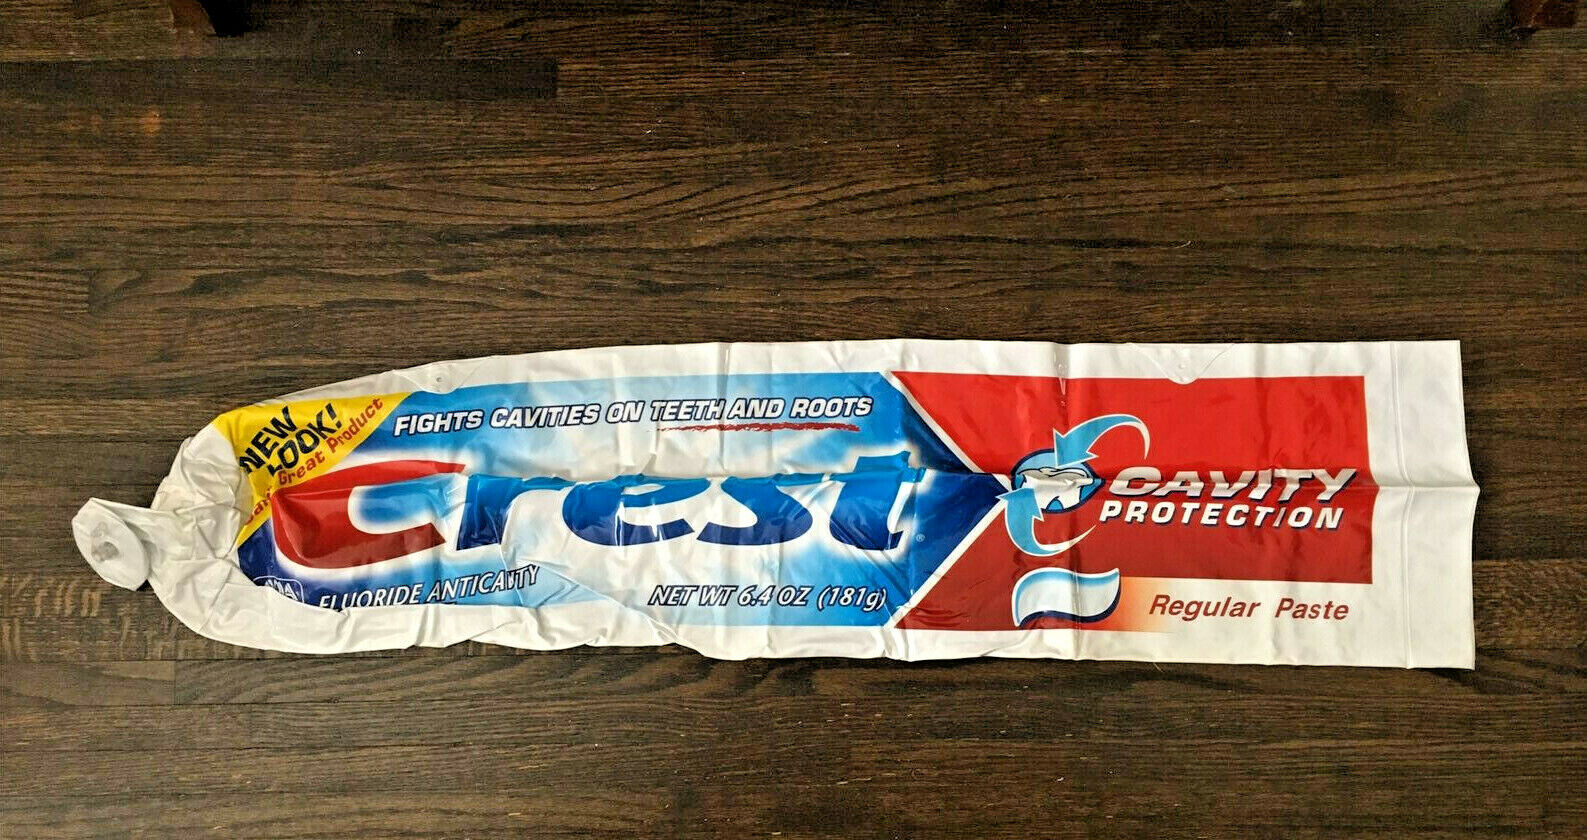 Crest Toothpaste Blow Up Inflatable Store Display Advertising Large 40 inches